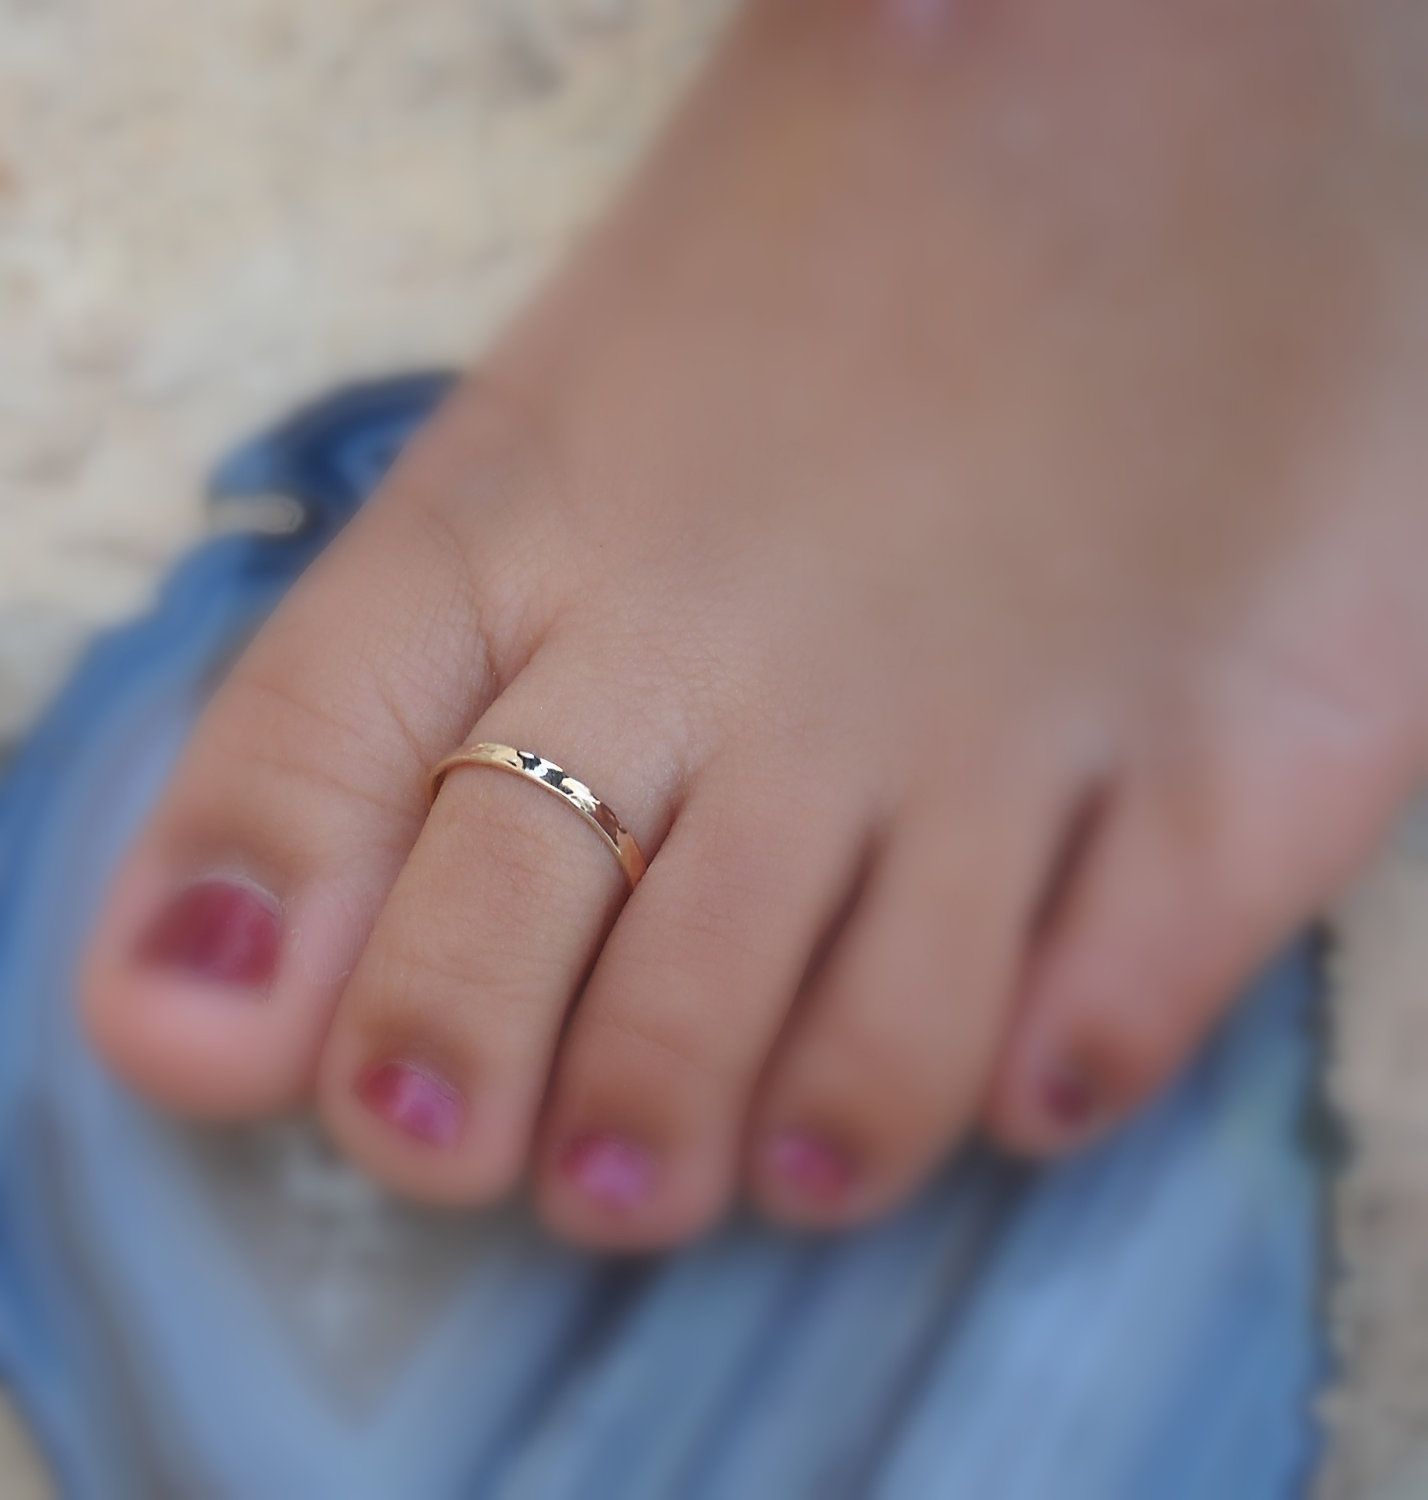 Cute Simple Toe Ring (View 15 of 15)